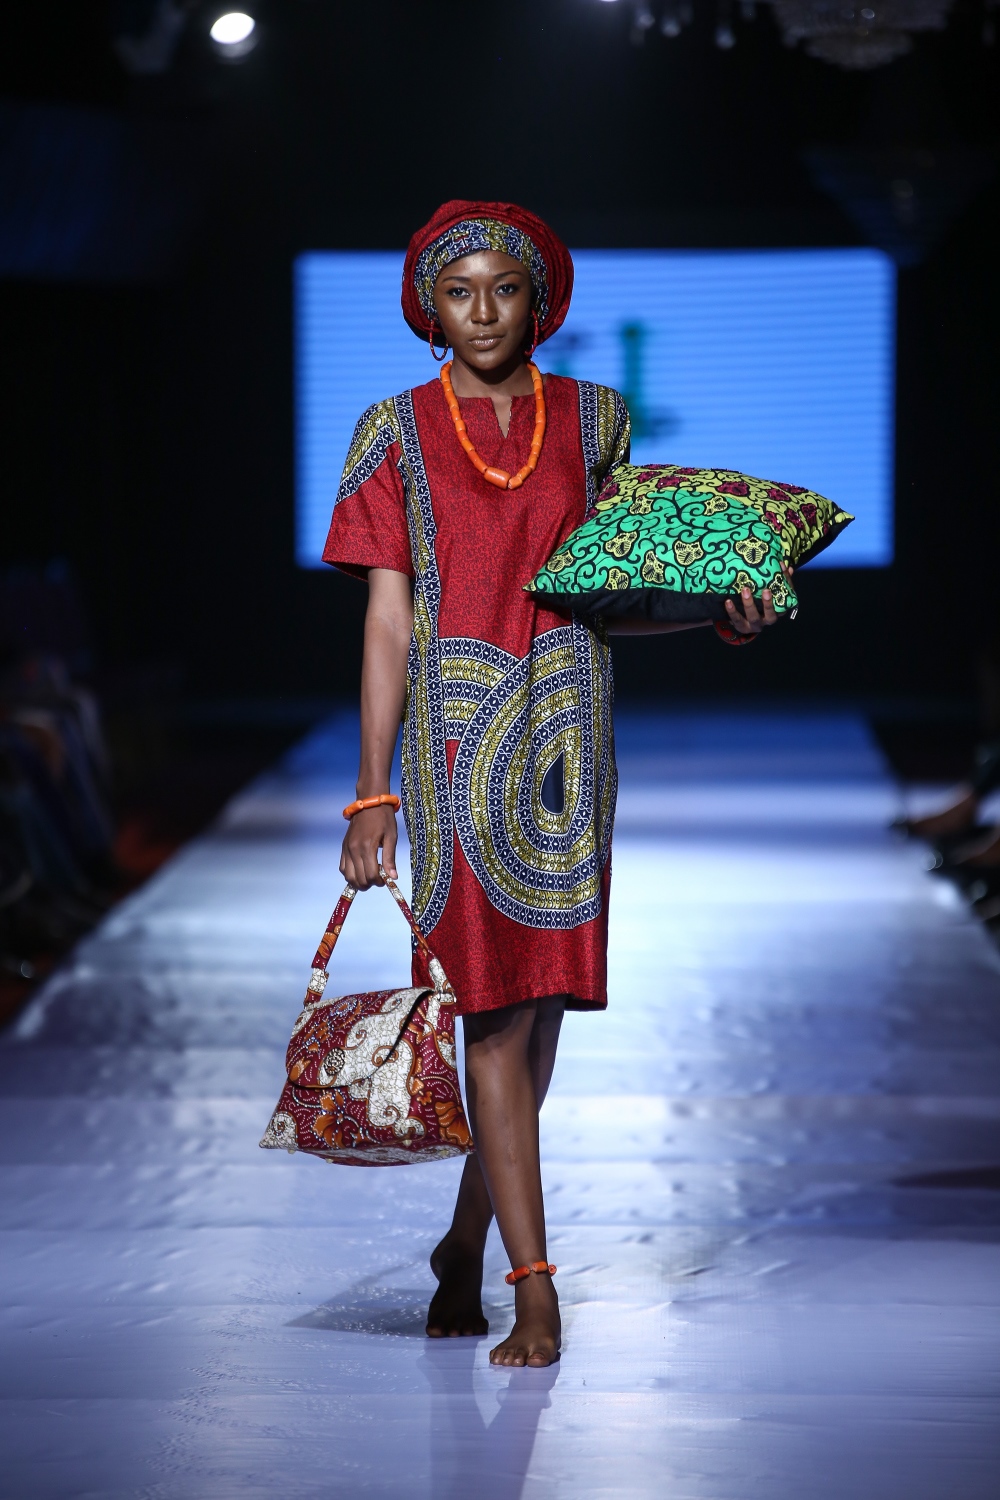 Designer Mmakamba showcased her recent collection for Day 1 of Africa Fashion Week Nigeria 2017. From the fringe to the low neckline pieces, Mmakamba definitely has a lot to offer the contemporary woman. Check it out!